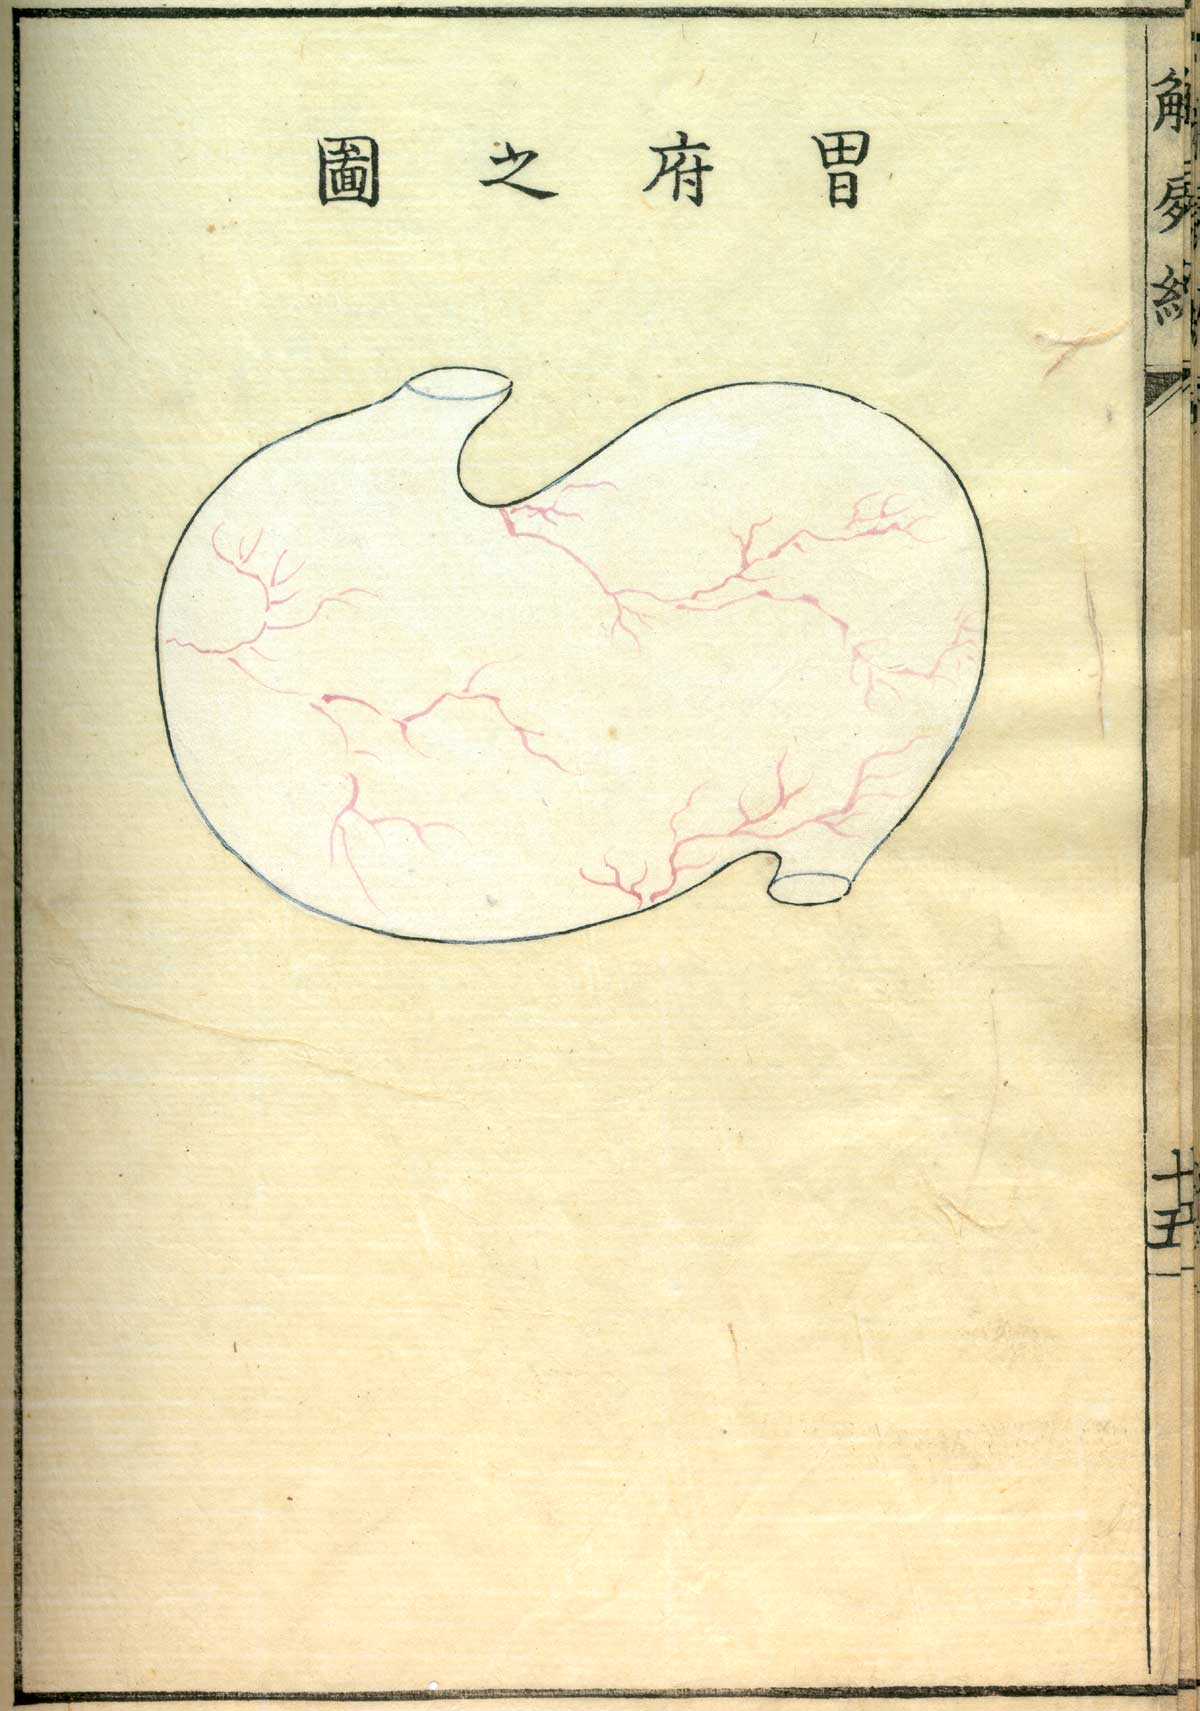 Hand colored woodcut of the stomach with Japanese text above describing some of the structures, from Shinnin Kawaguchi's Kaishi hen, NLM Call no.: WZ 260 K21k 1772.